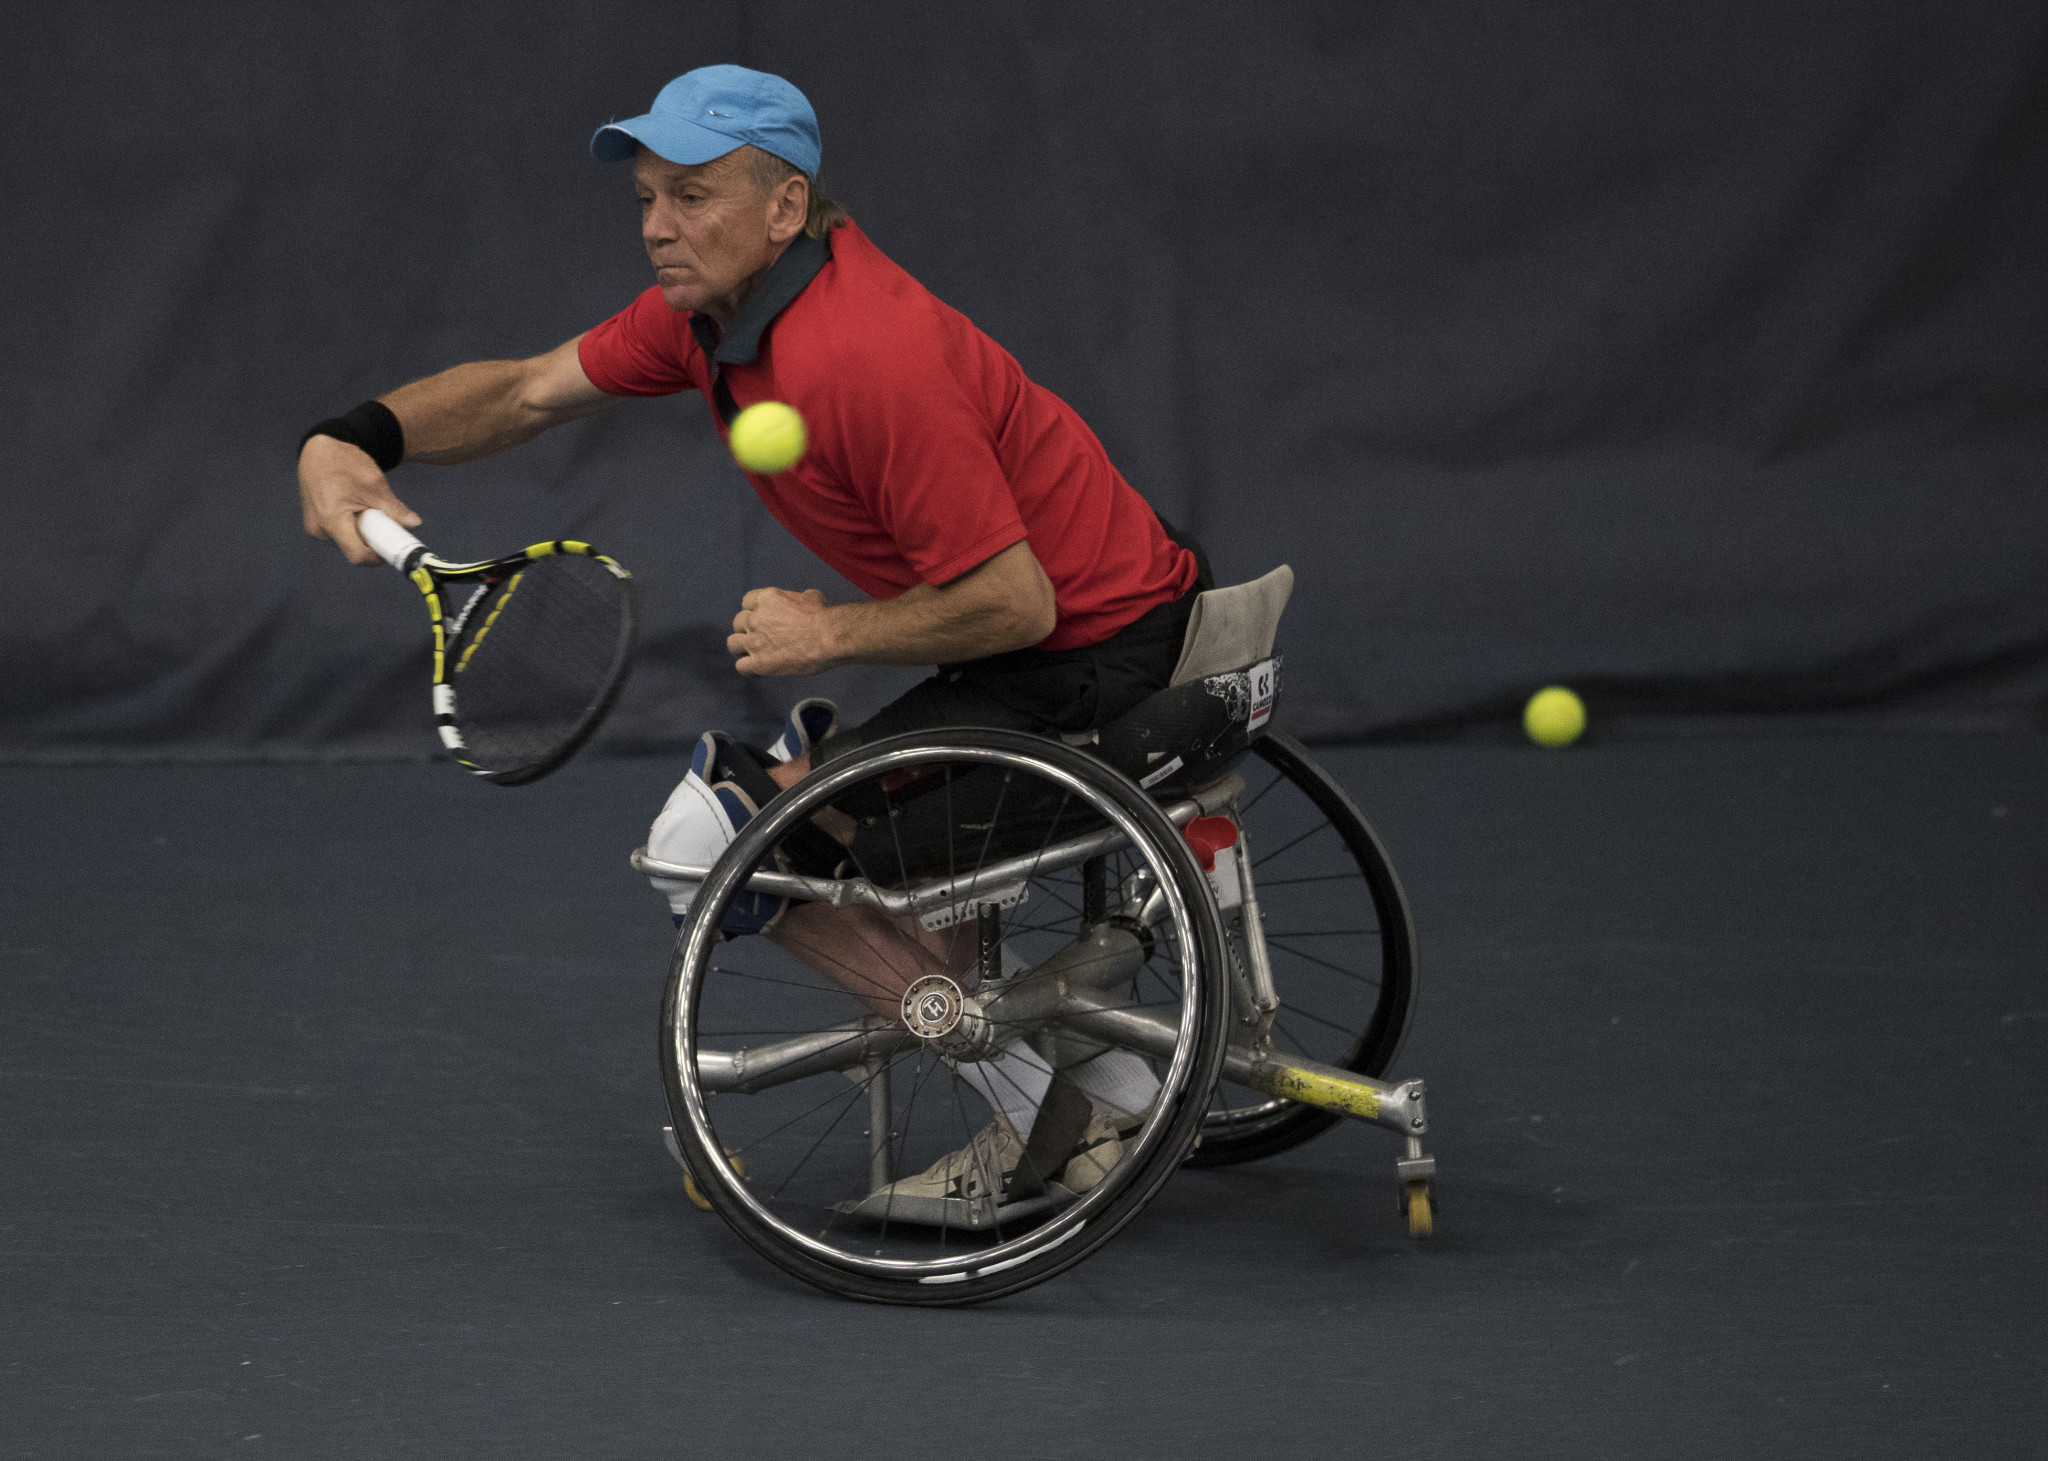 Austria's men edge past United States on opening day of ITF Wheelchair Tennis World Team Cup